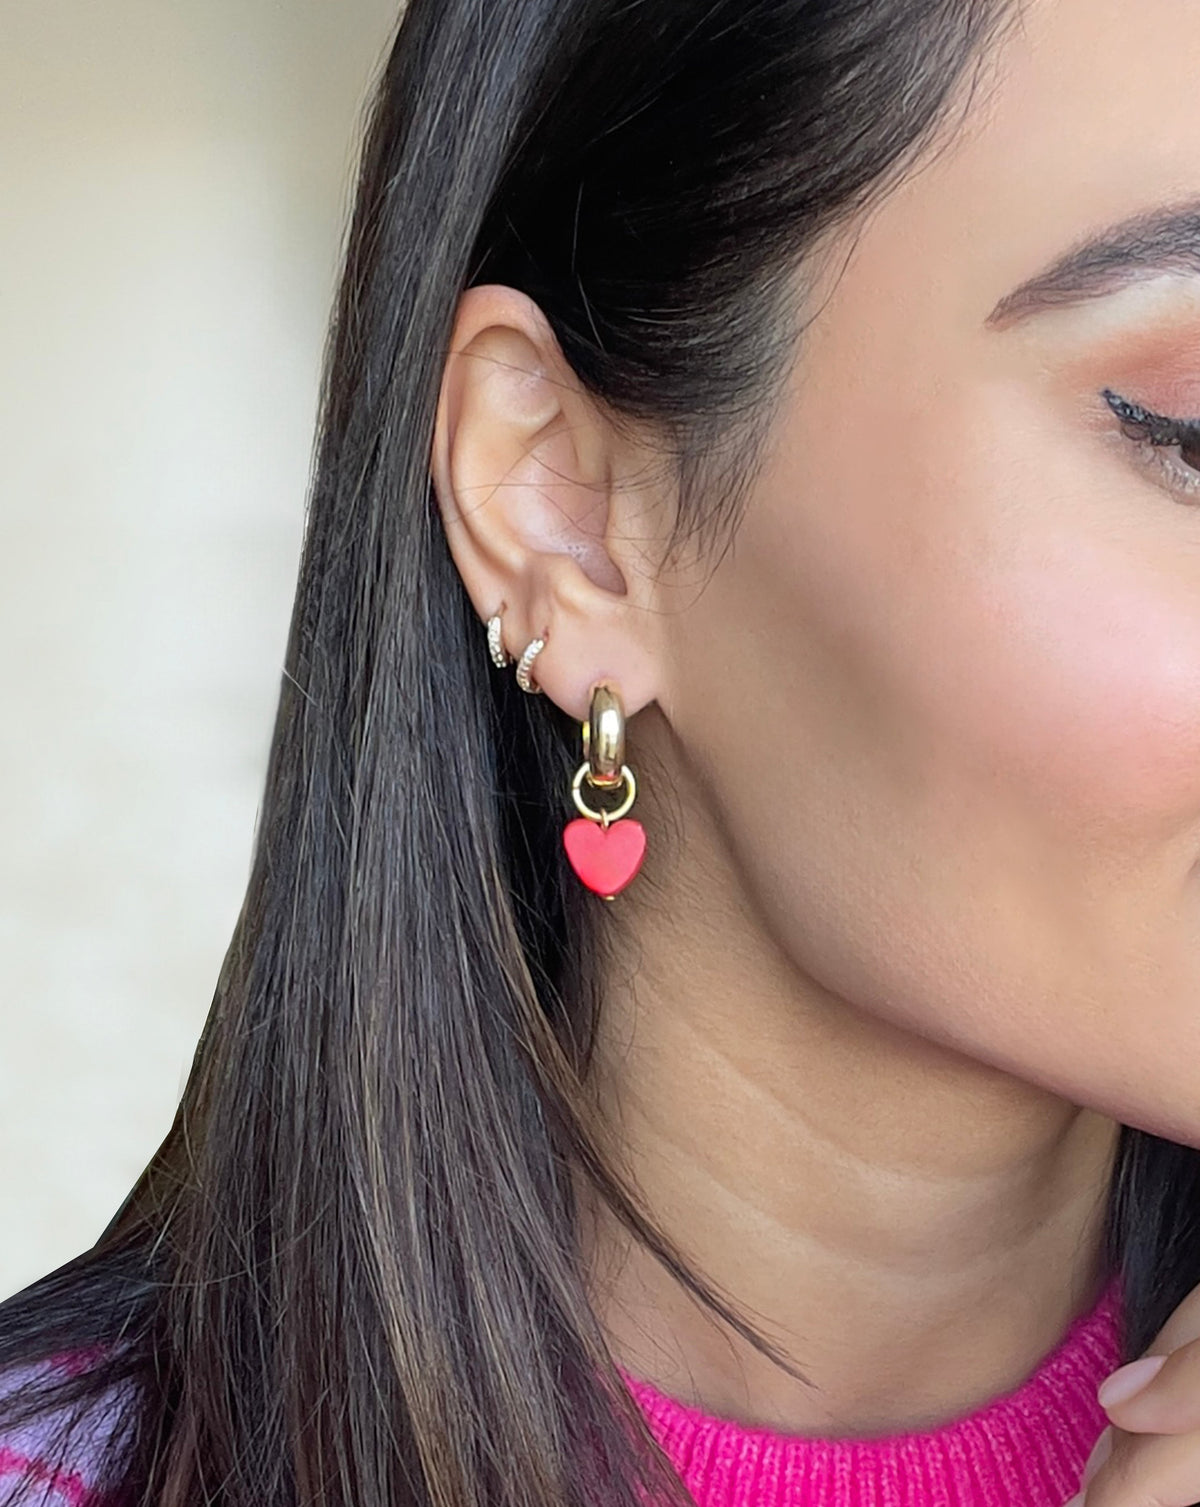 LYHO Charming heart earrings. Heart charm in color red with gold plated hoops on model.